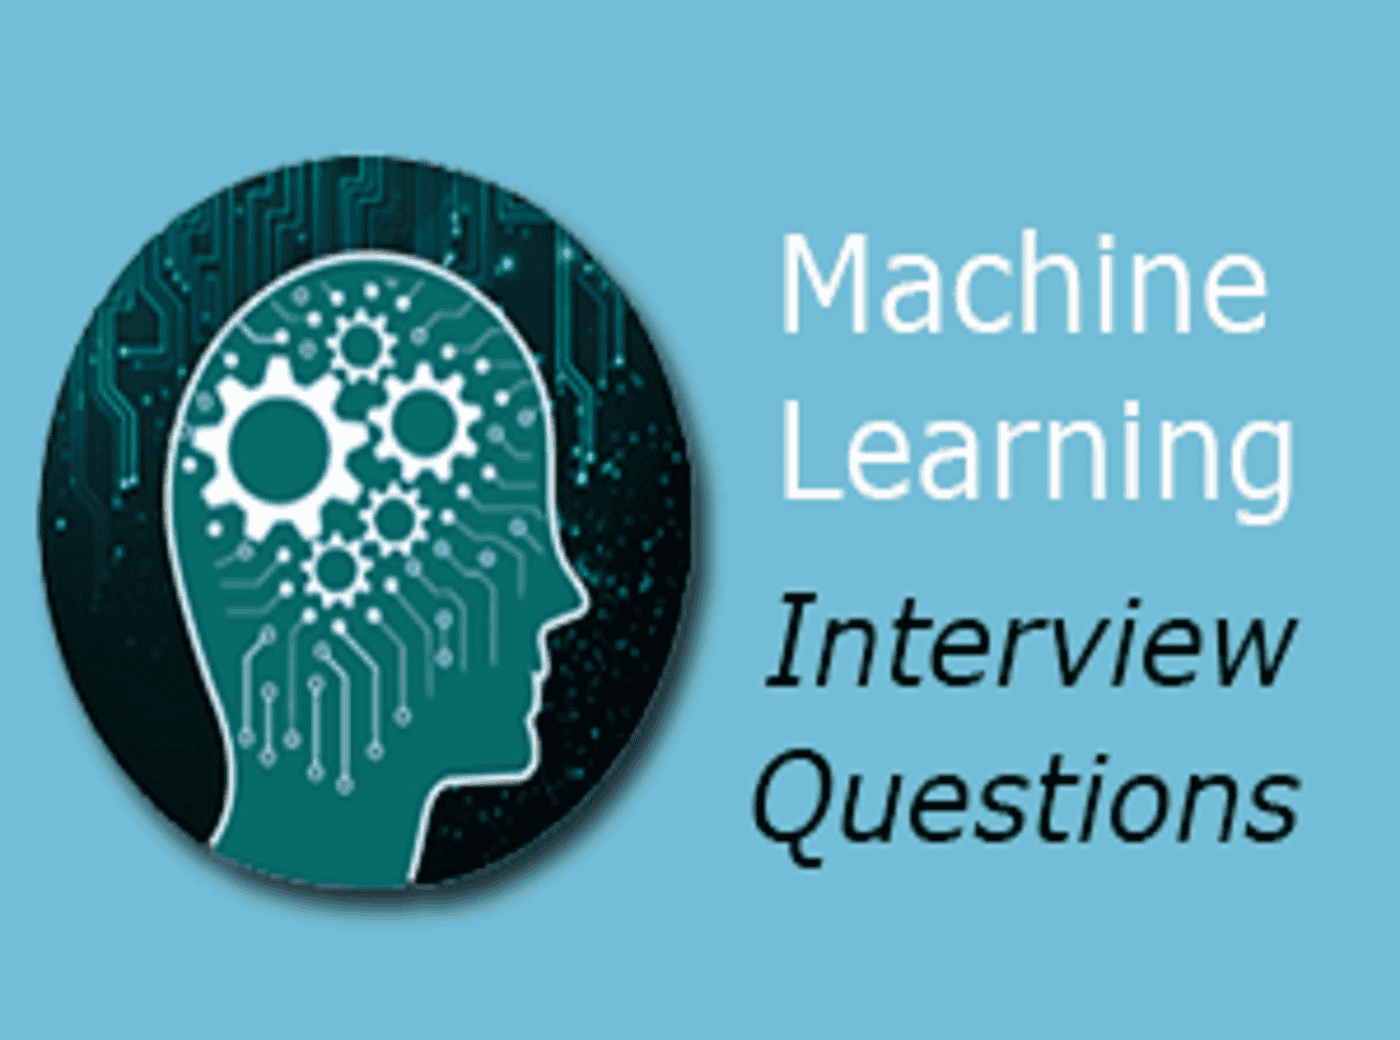 Machine Learning interview questions